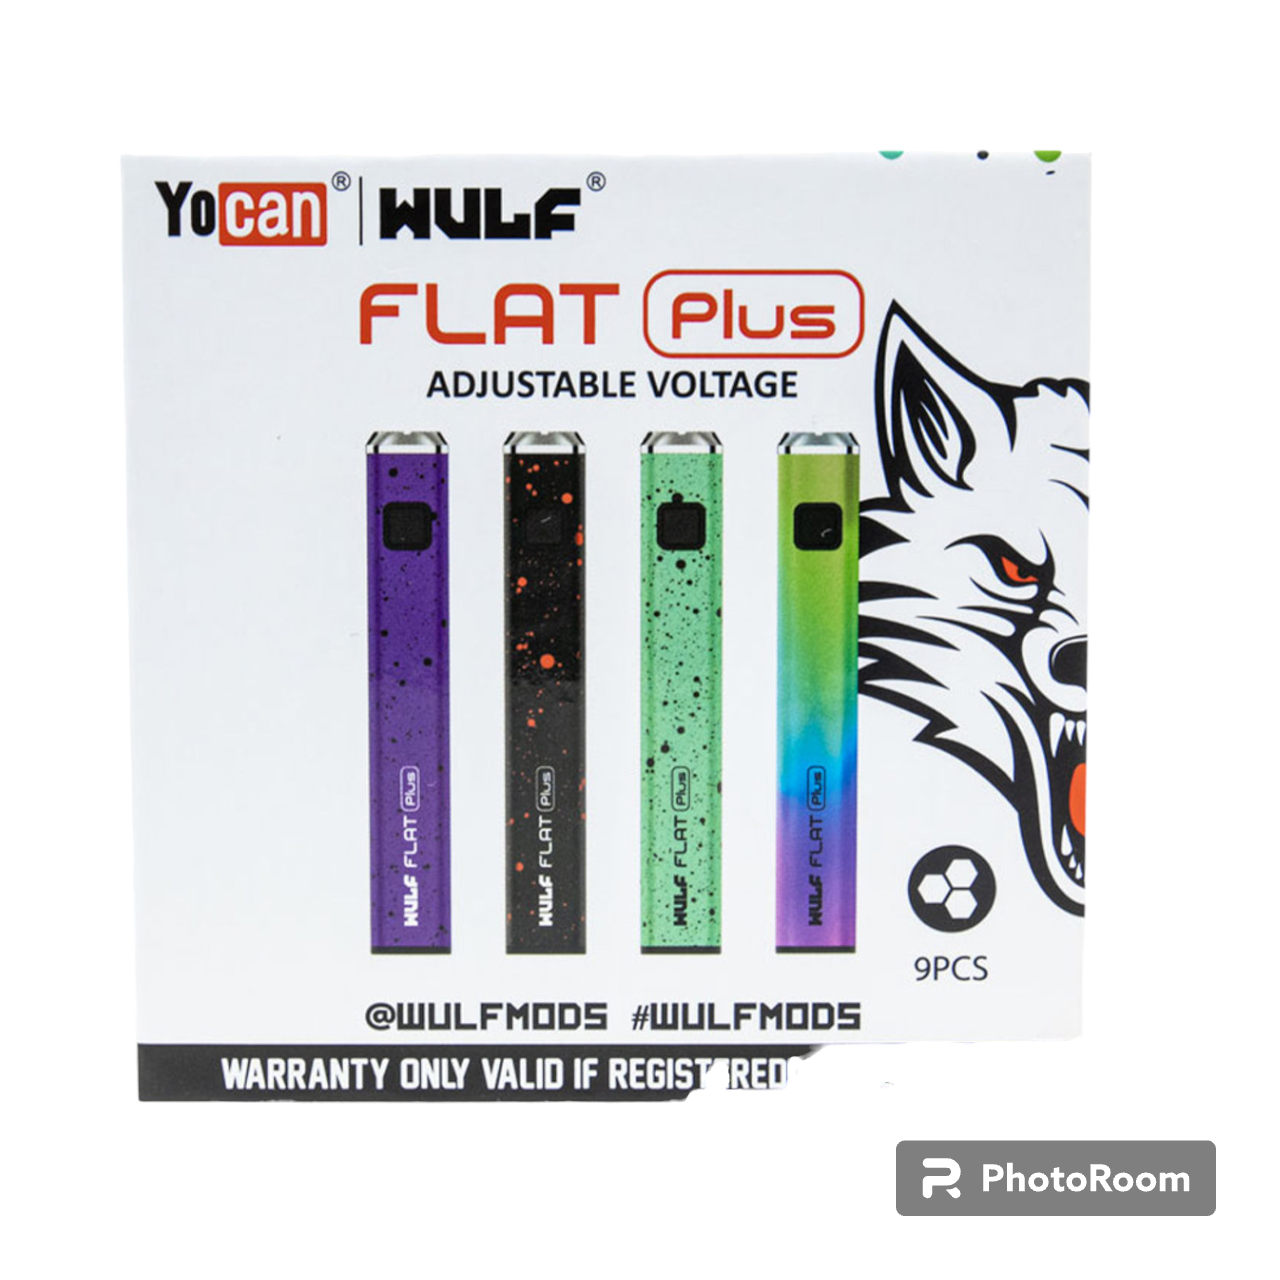 Wulf Mods x Yocan Flat Plus 900mAh Adjustable Voltage Vaporizer Pen Battery - Assorted Colors - Display of 9